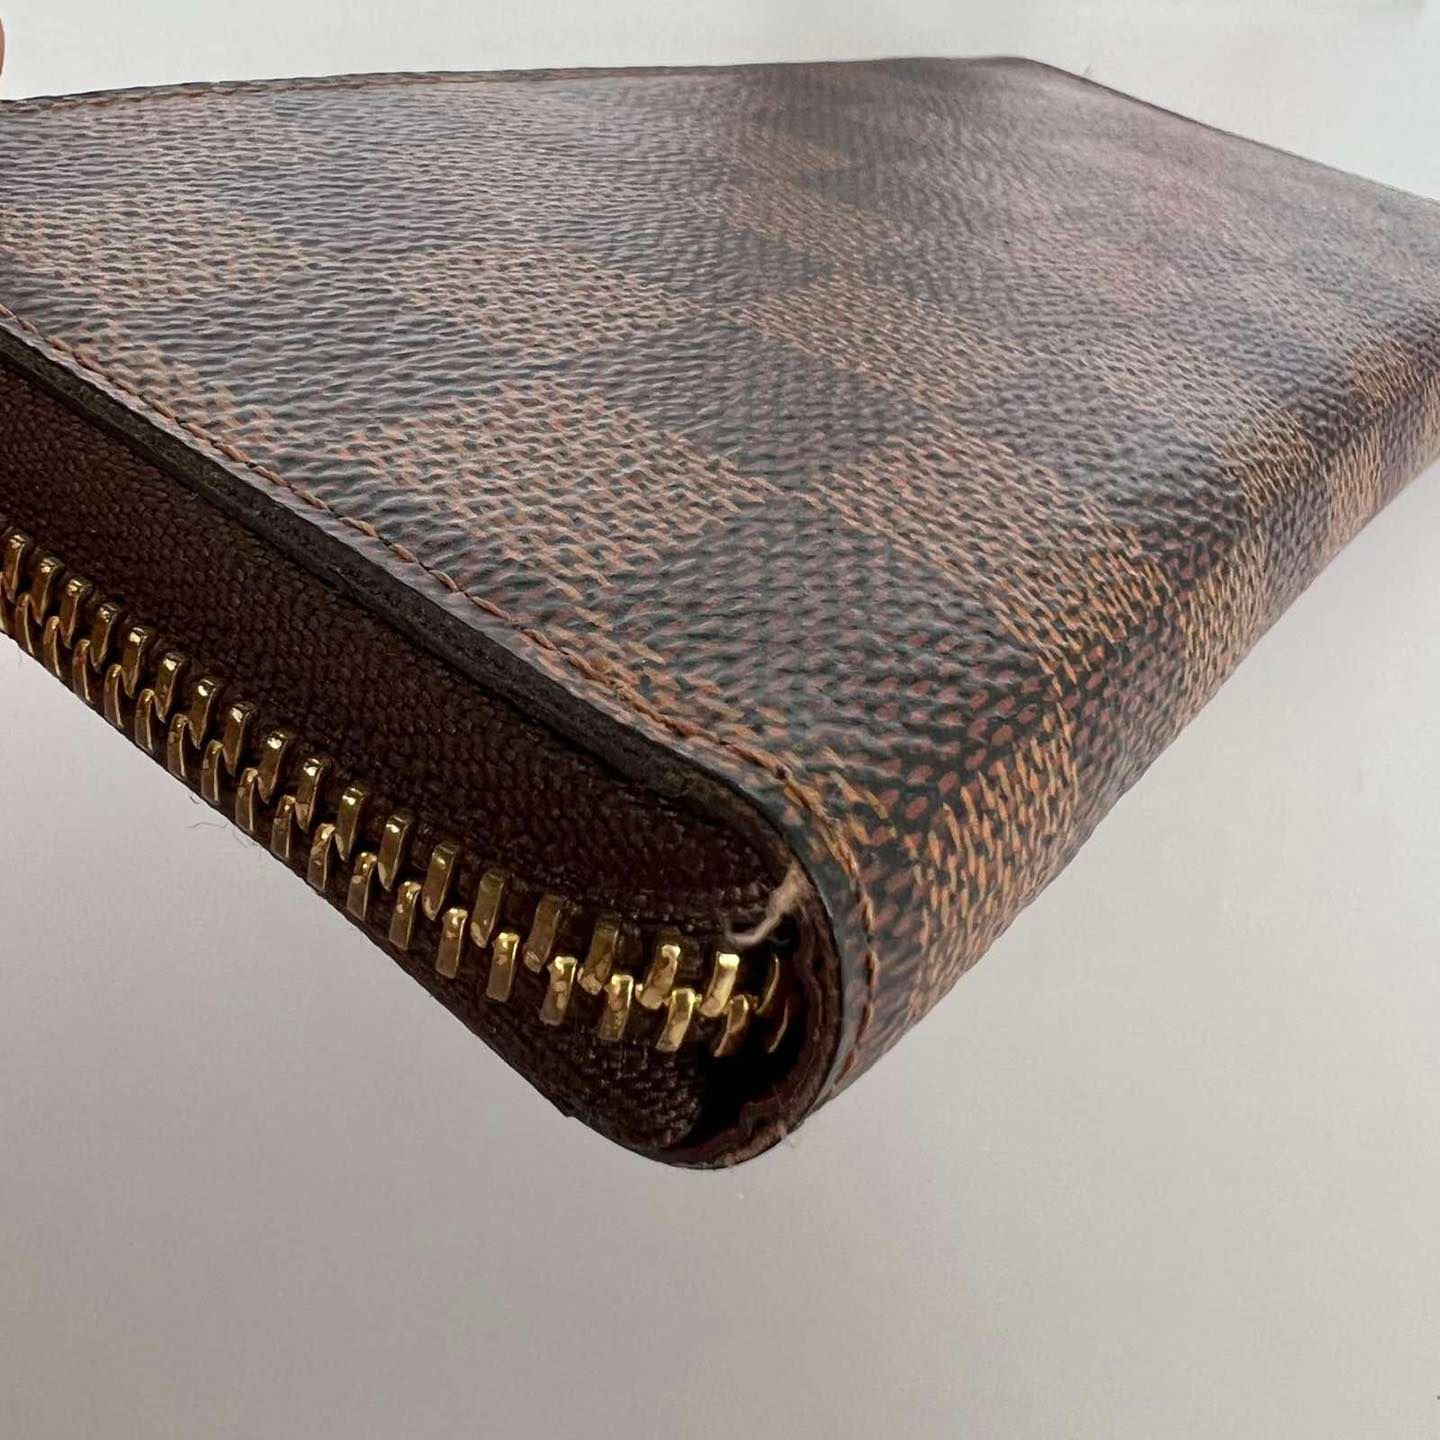 Shop Louis Vuitton CLEMENCE 2019-20FW Clémence Wallet (N60534) by Ravie